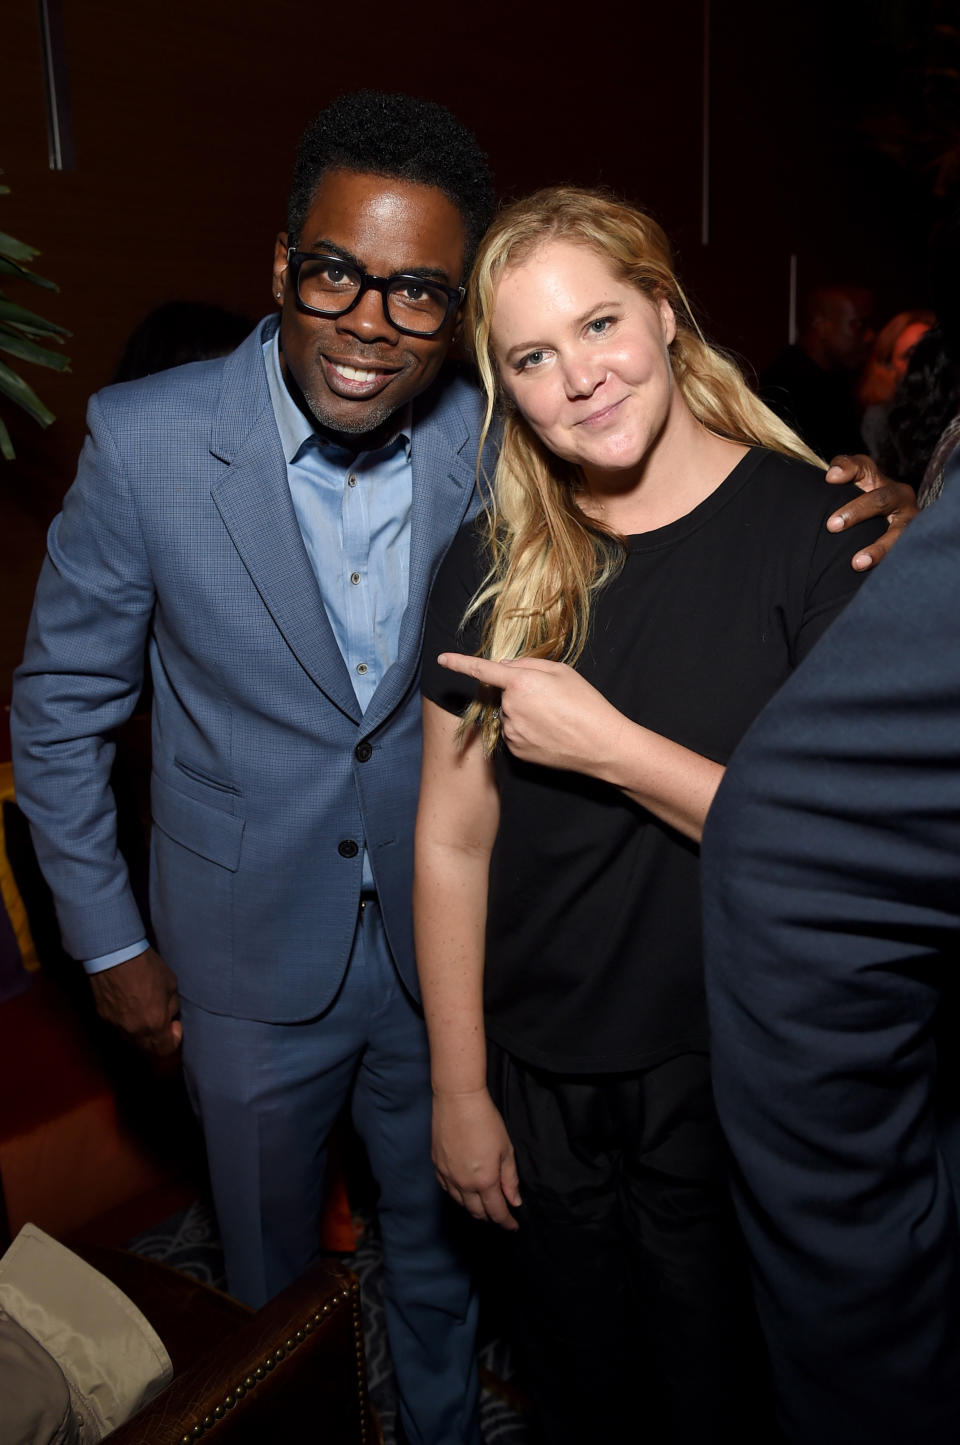 NEW YORK, NY - SEPTEMBER 12:  Chris Rock and Amy Schumer attend the after party for the 2018 GOOD+ Foundation’s Evening of Comedy + Music Benefit, presented by Samsung Electronics America at Ziegfeld Ballroom on September 12, 2018 in New York City.  (Photo by Jamie McCarthy/Getty Images for GOOD+ Foundation)